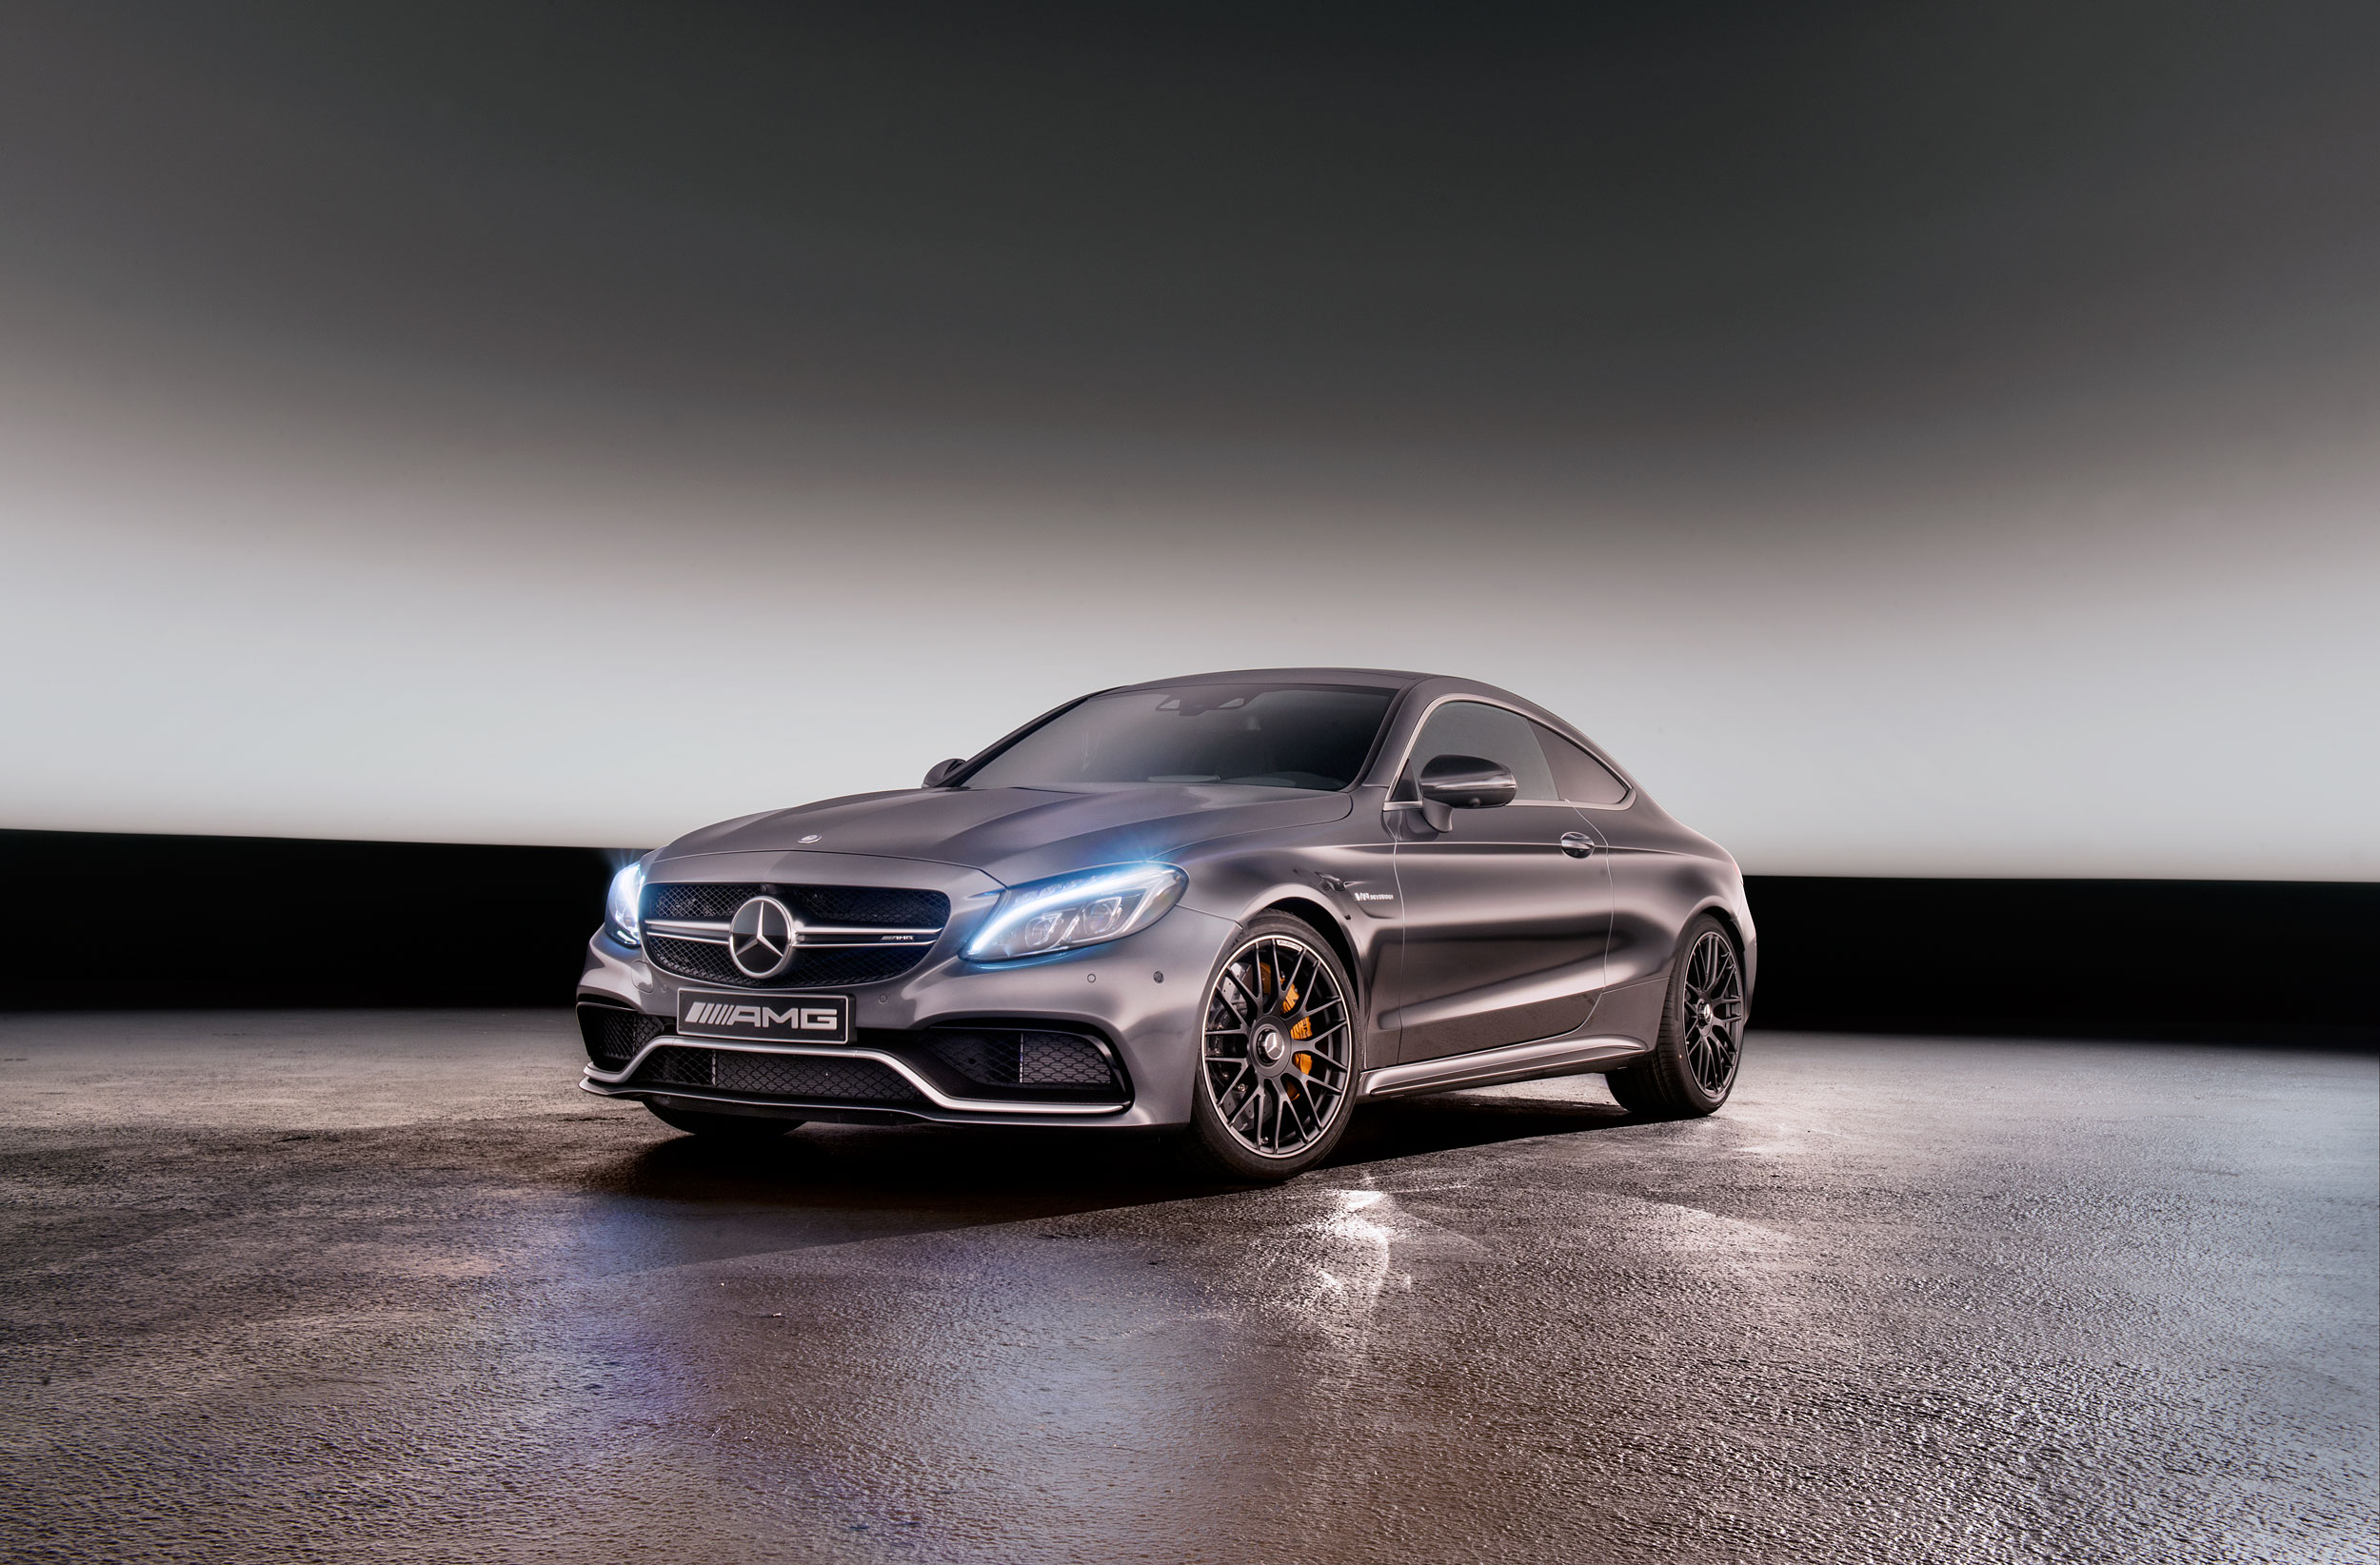 Mercedes C 63 Amg Coupe Mercedes-AMG C 63 Coupe details and pictures | evo